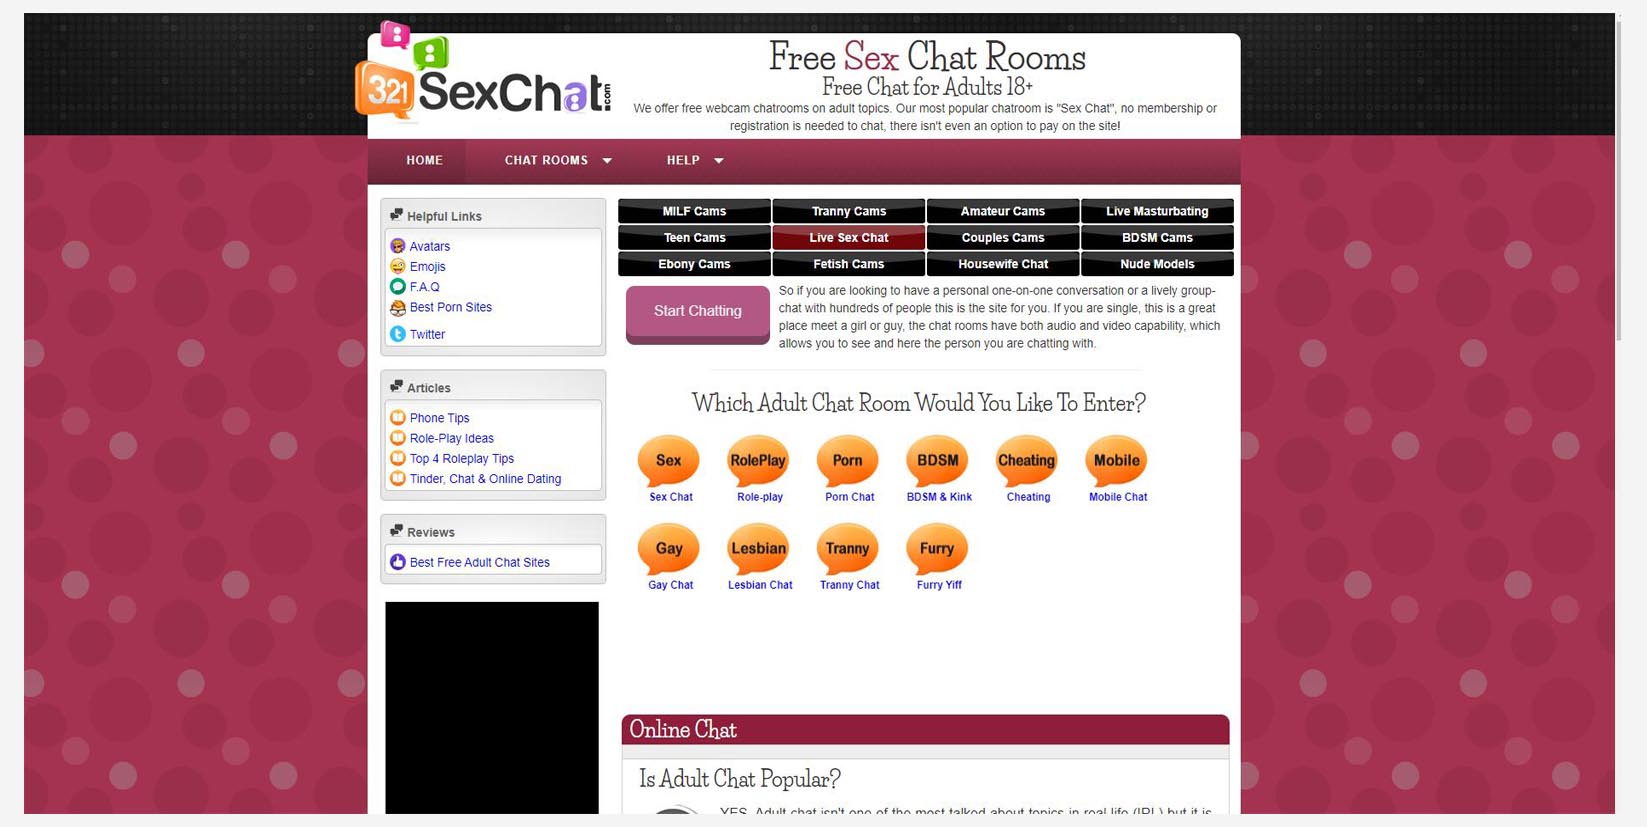 321SexChat is a sex chat site specifically designed for having cyber sex. 